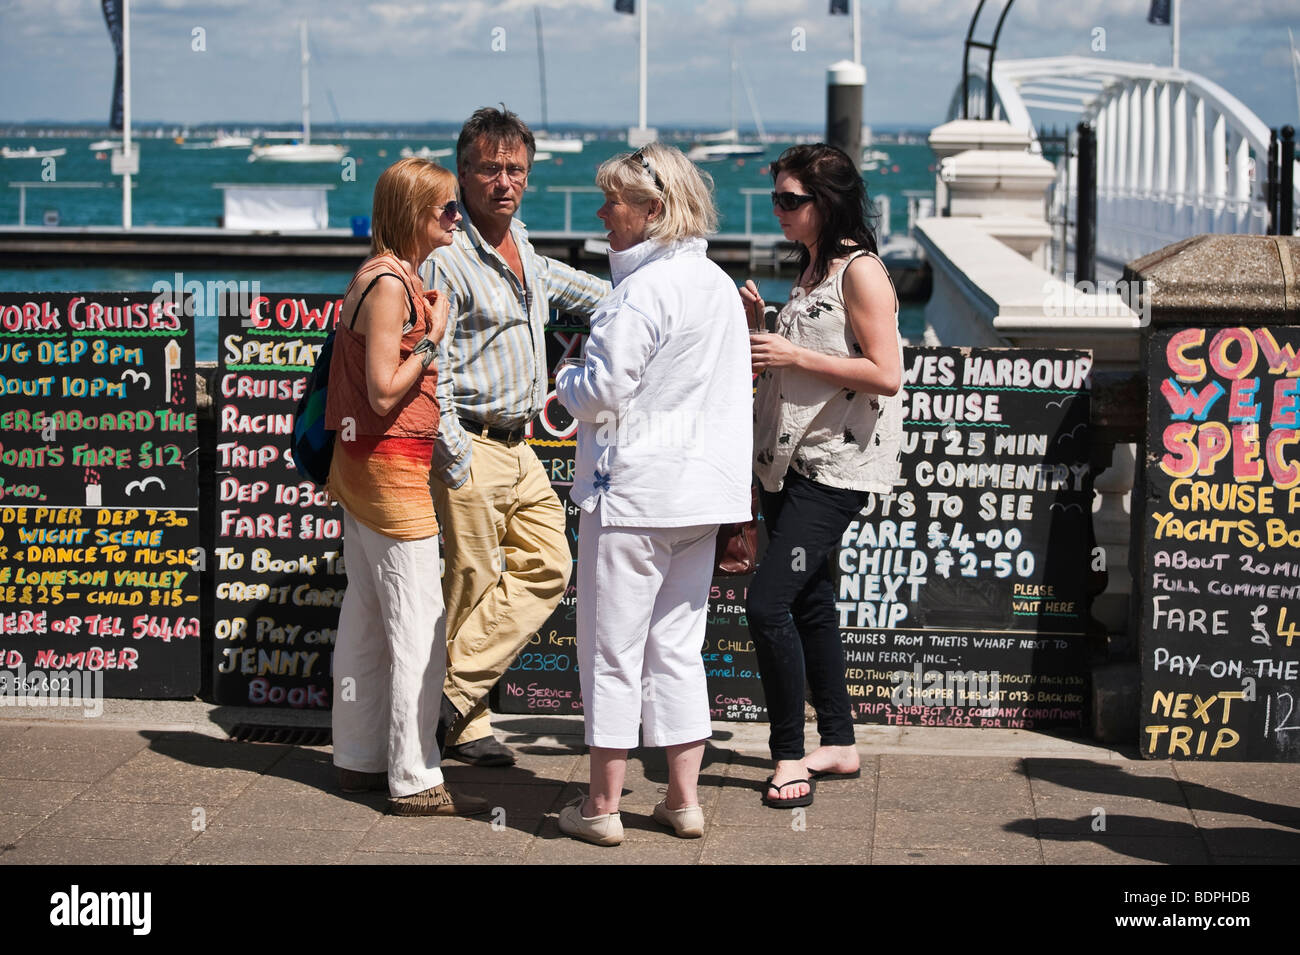 Tourists wait for a sightseeing tour boat at Cowes week sailing regatta, 2009, Isle of Wight, England, UK Stock Photo